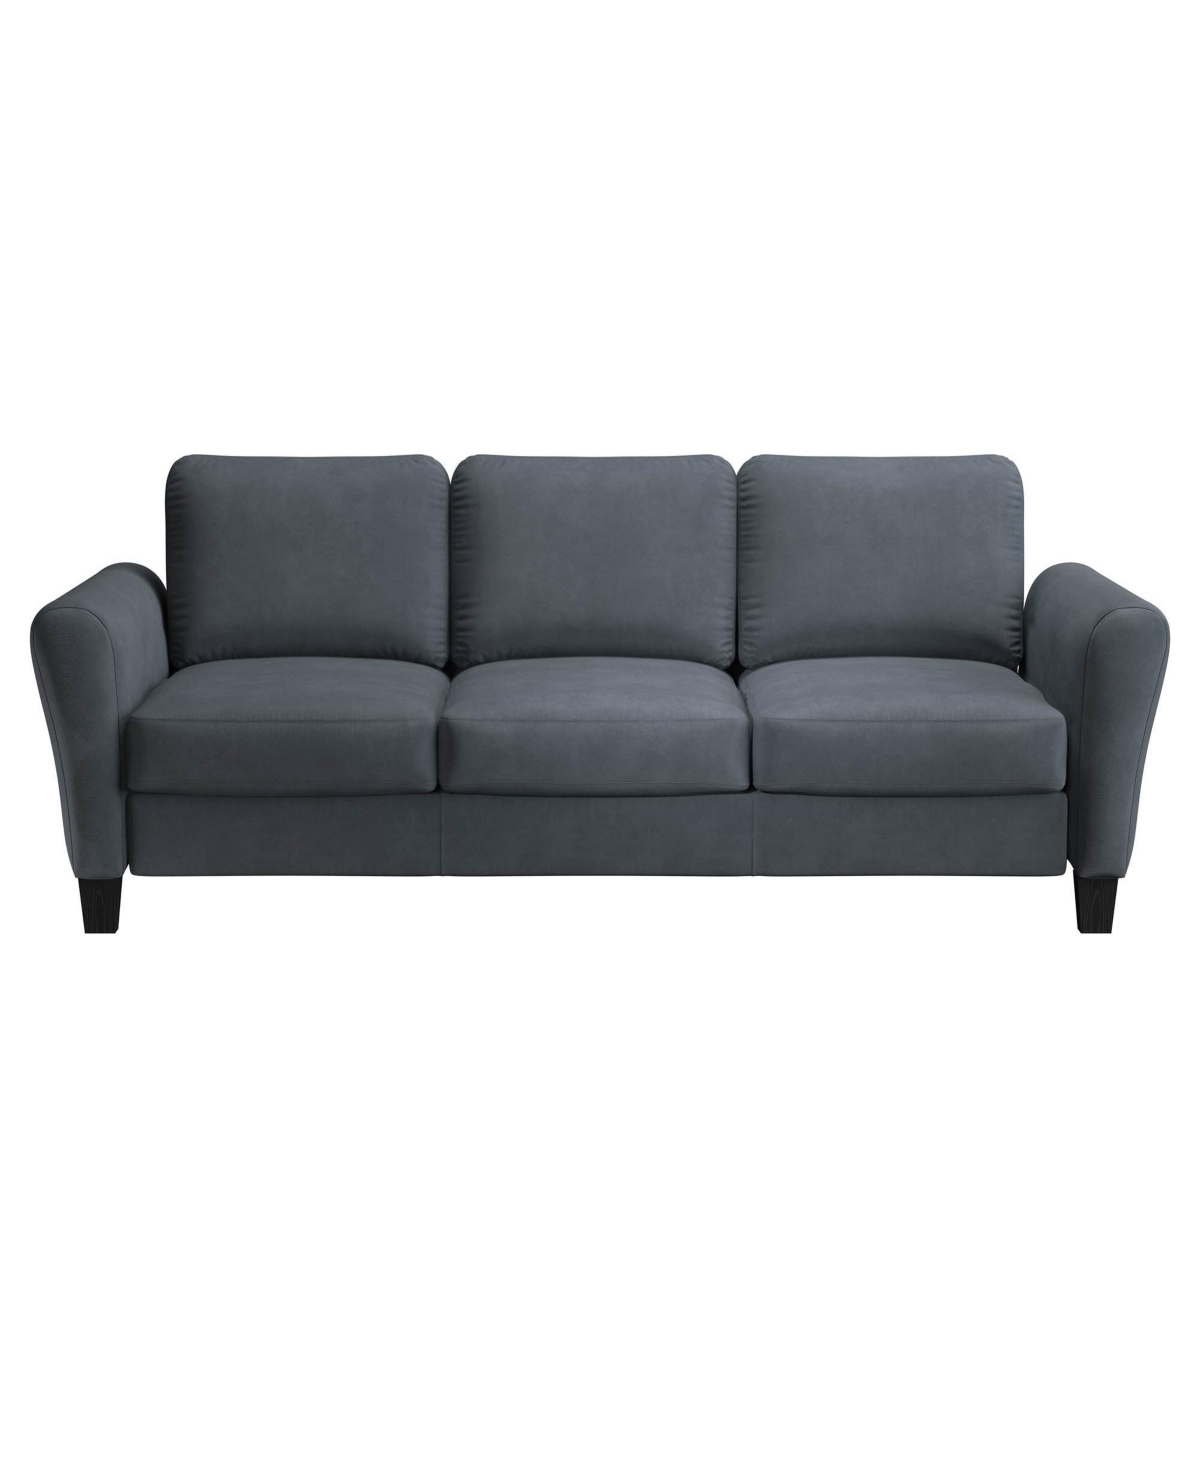 Lifestyle Solutions Wilshire Sofa With Rolled Arms In Dark Grey